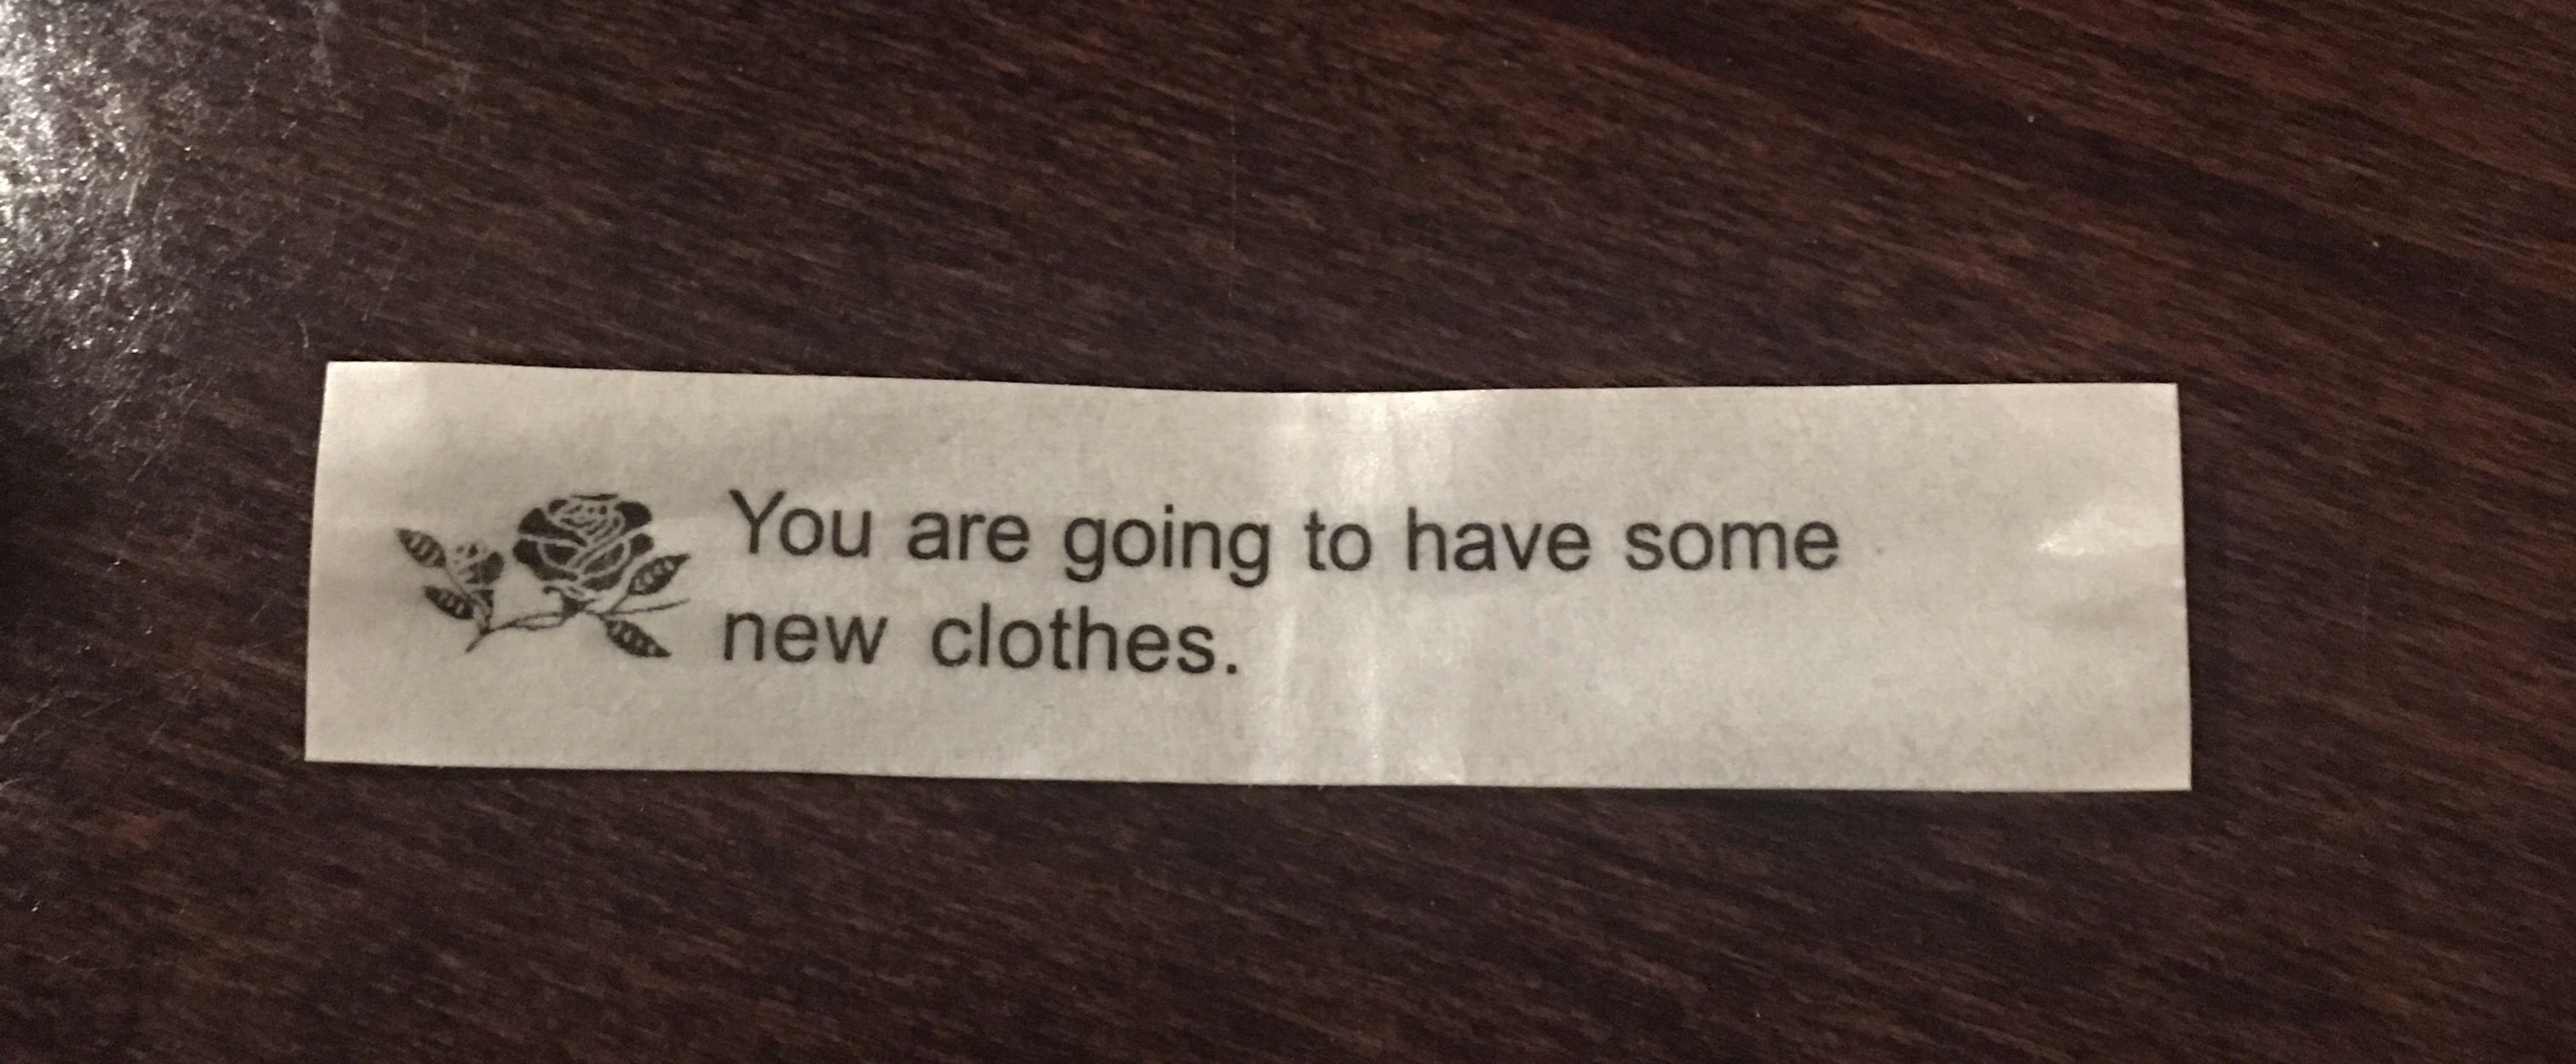 Got this in a fortune cookie today. Considering how 2020 has gone so far, I assume it means I'm heading to prison.